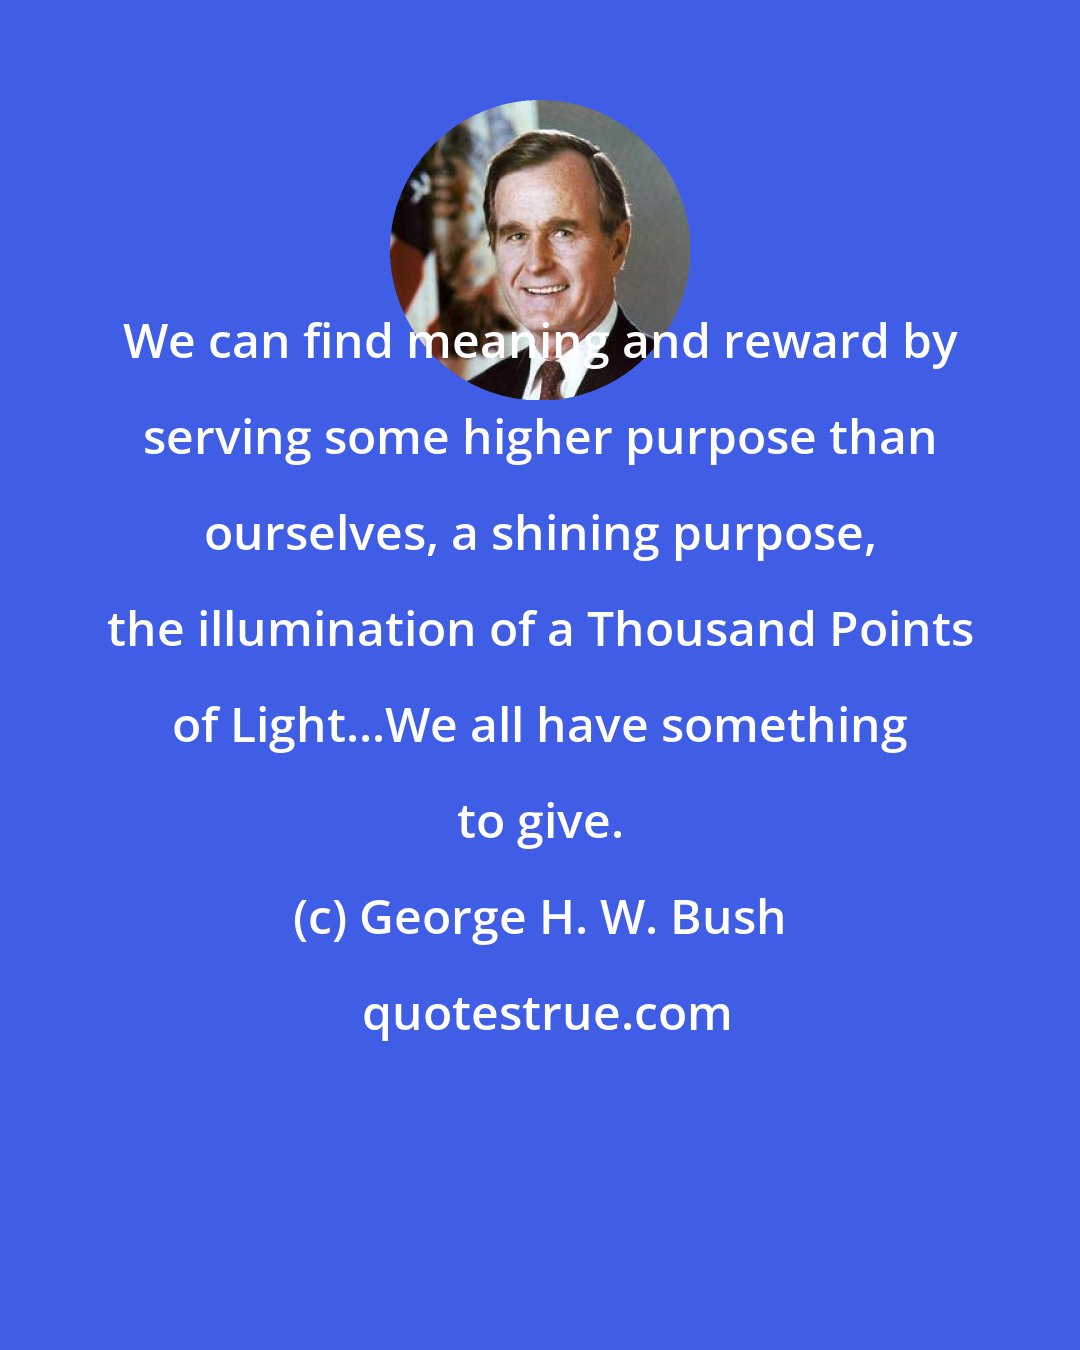 George H. W. Bush: We can find meaning and reward by serving some higher purpose than ourselves, a shining purpose, the illumination of a Thousand Points of Light...We all have something to give.